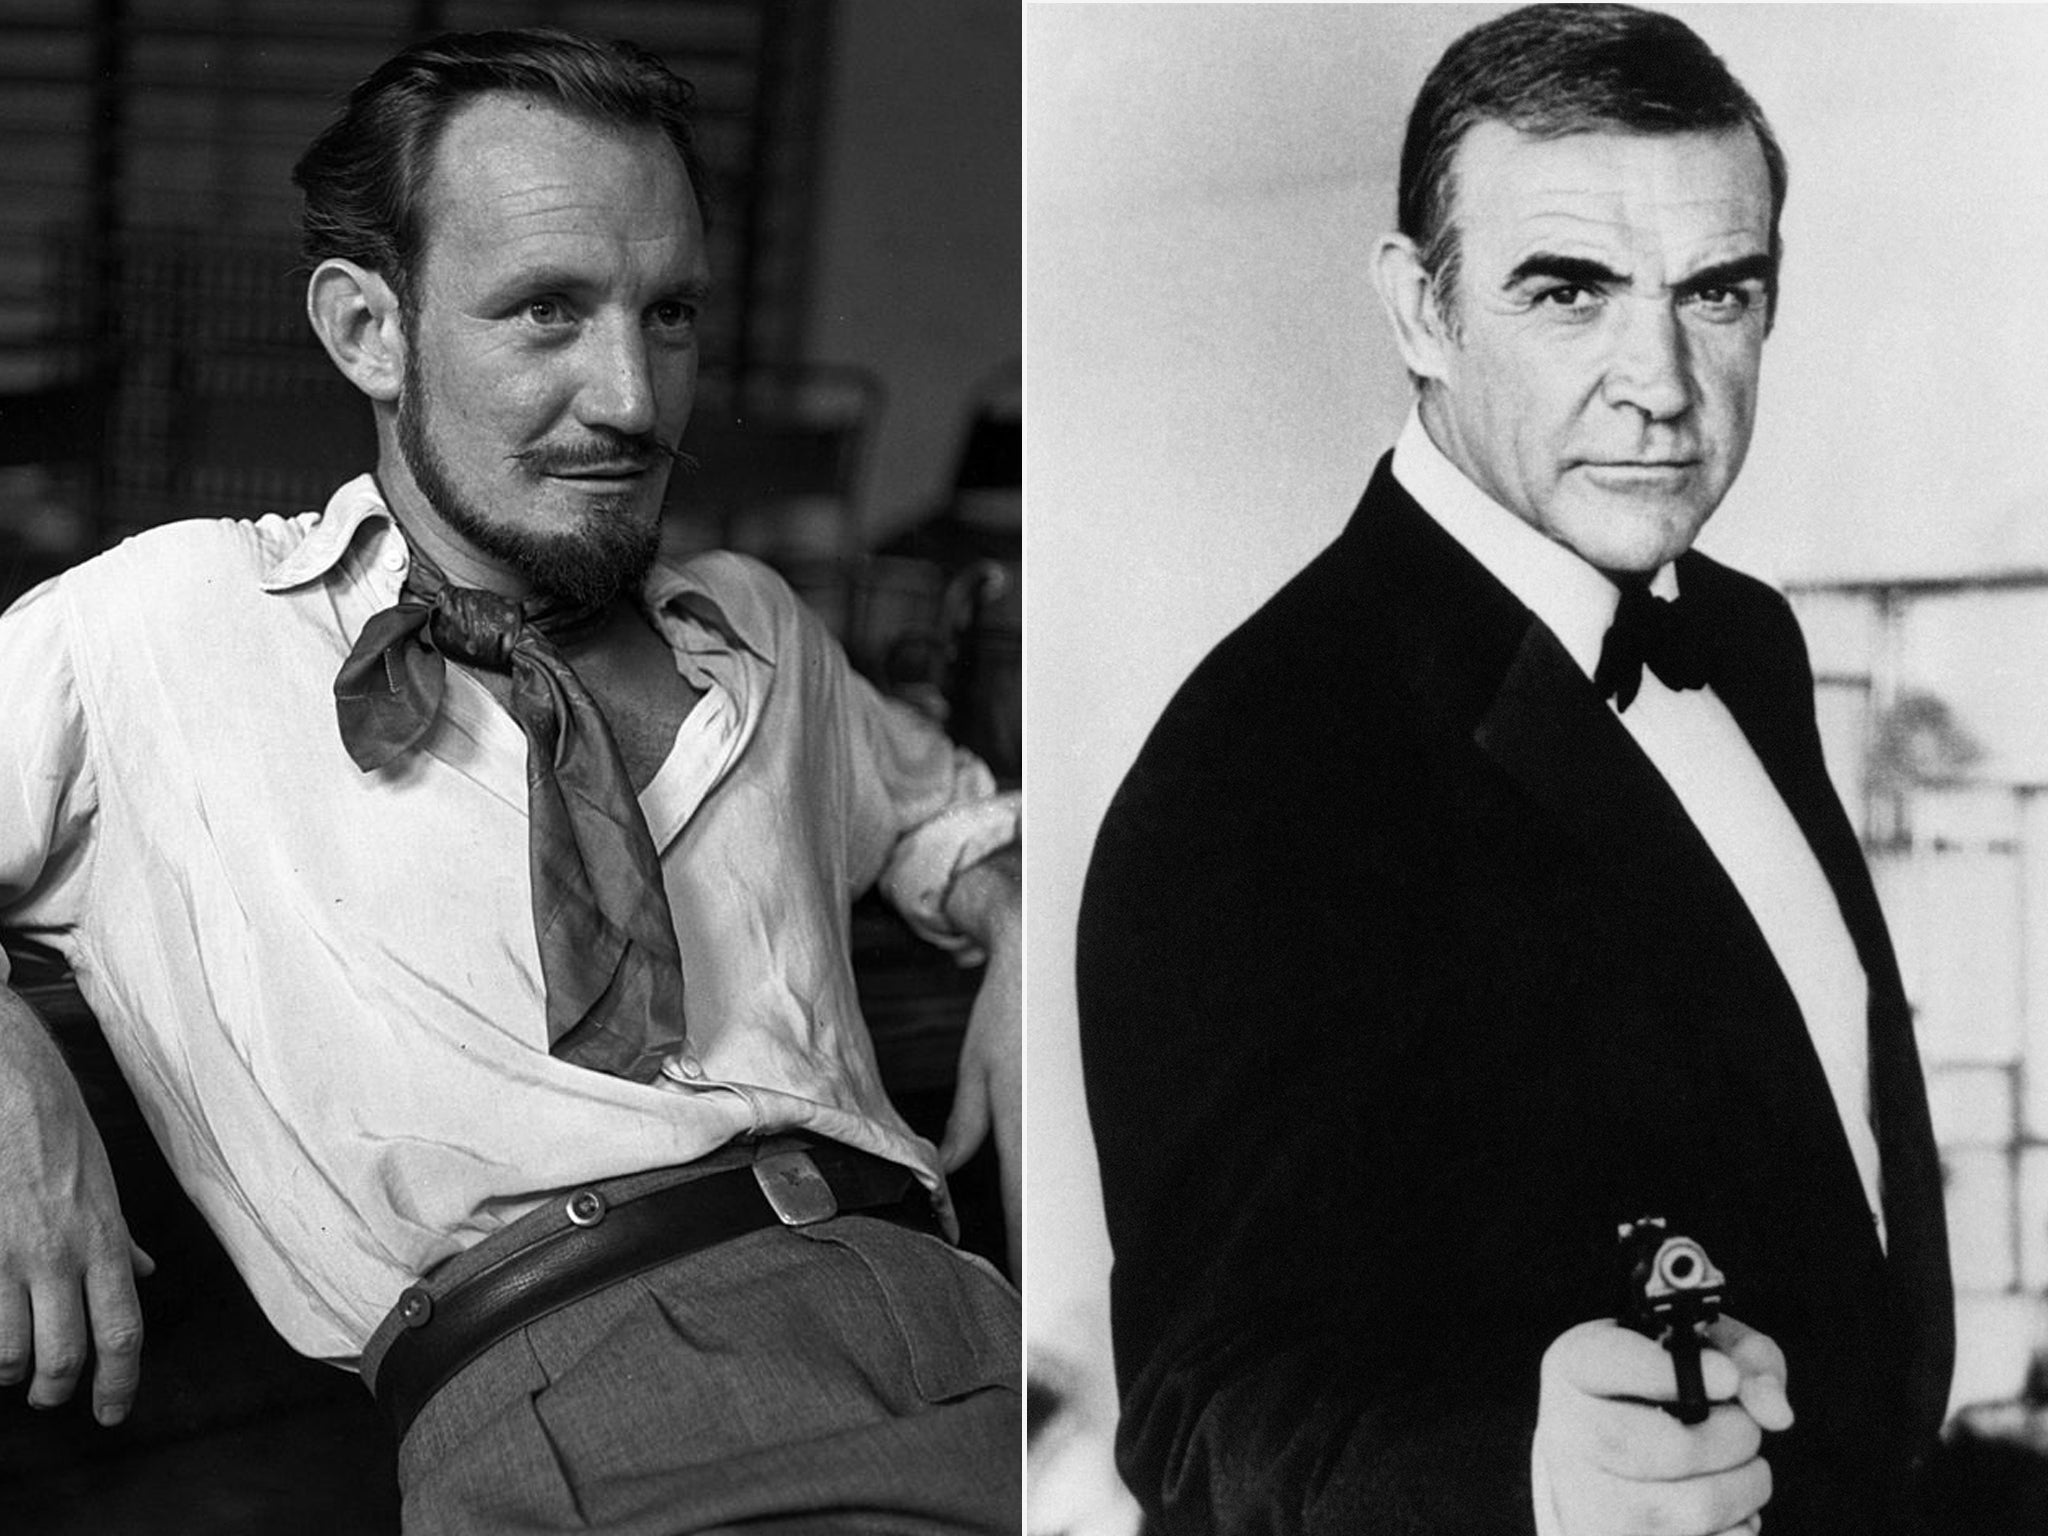 Trevor Howard, of ‘Brief Encounter’, was in the running to play James Bond before Sean Connery snapped up the role